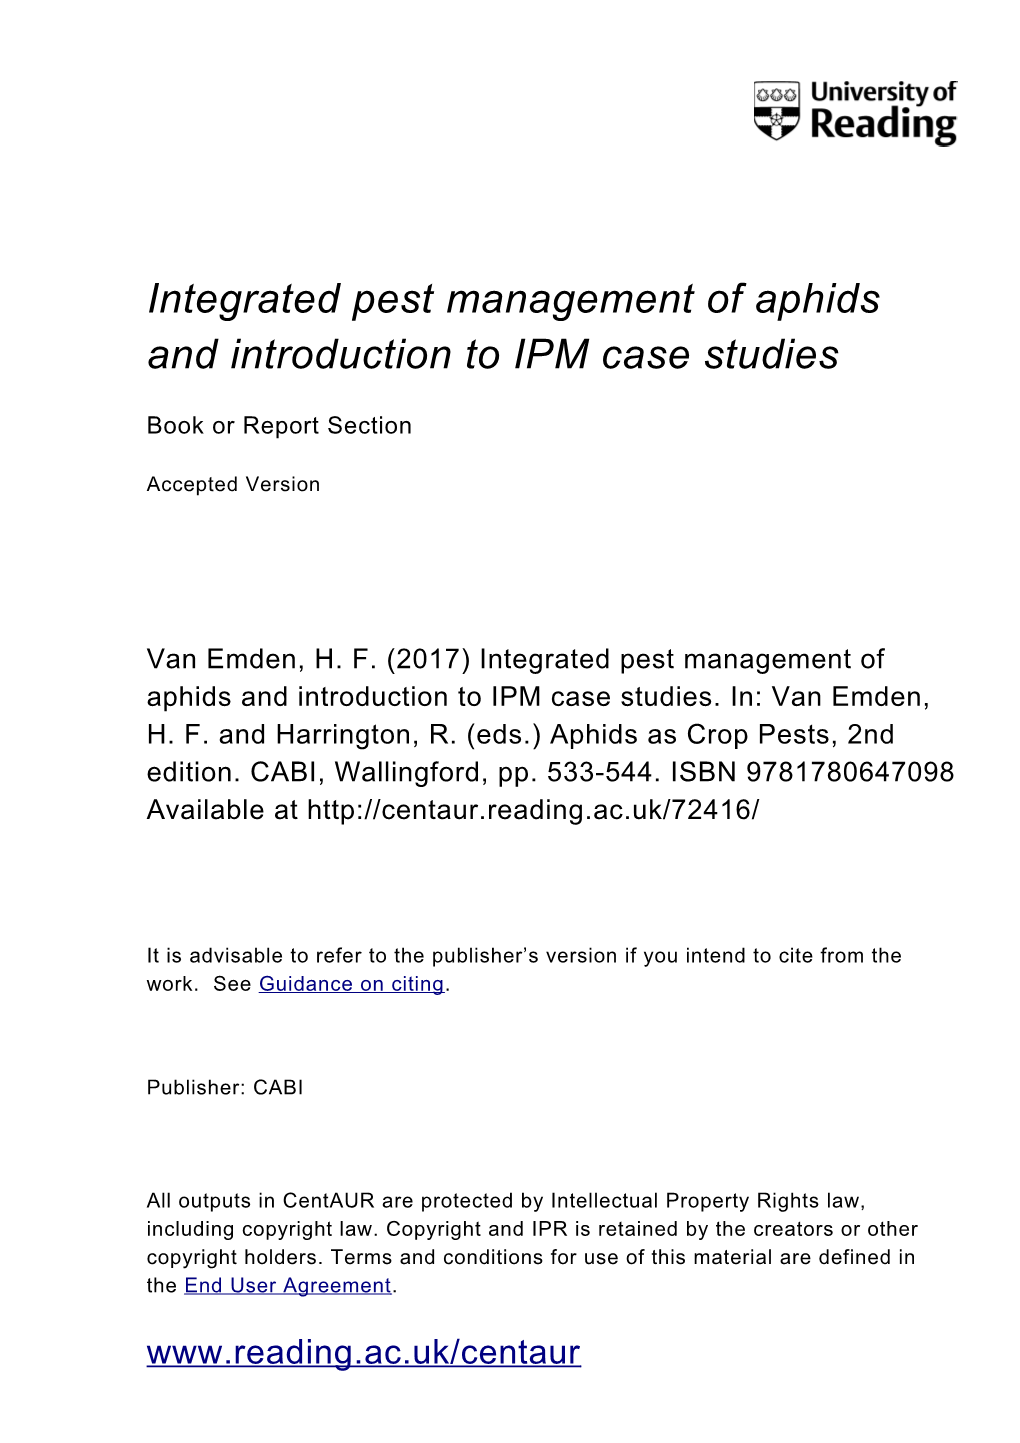 Integrated Pest Management of Aphids and Introduction to IPM Case Studies